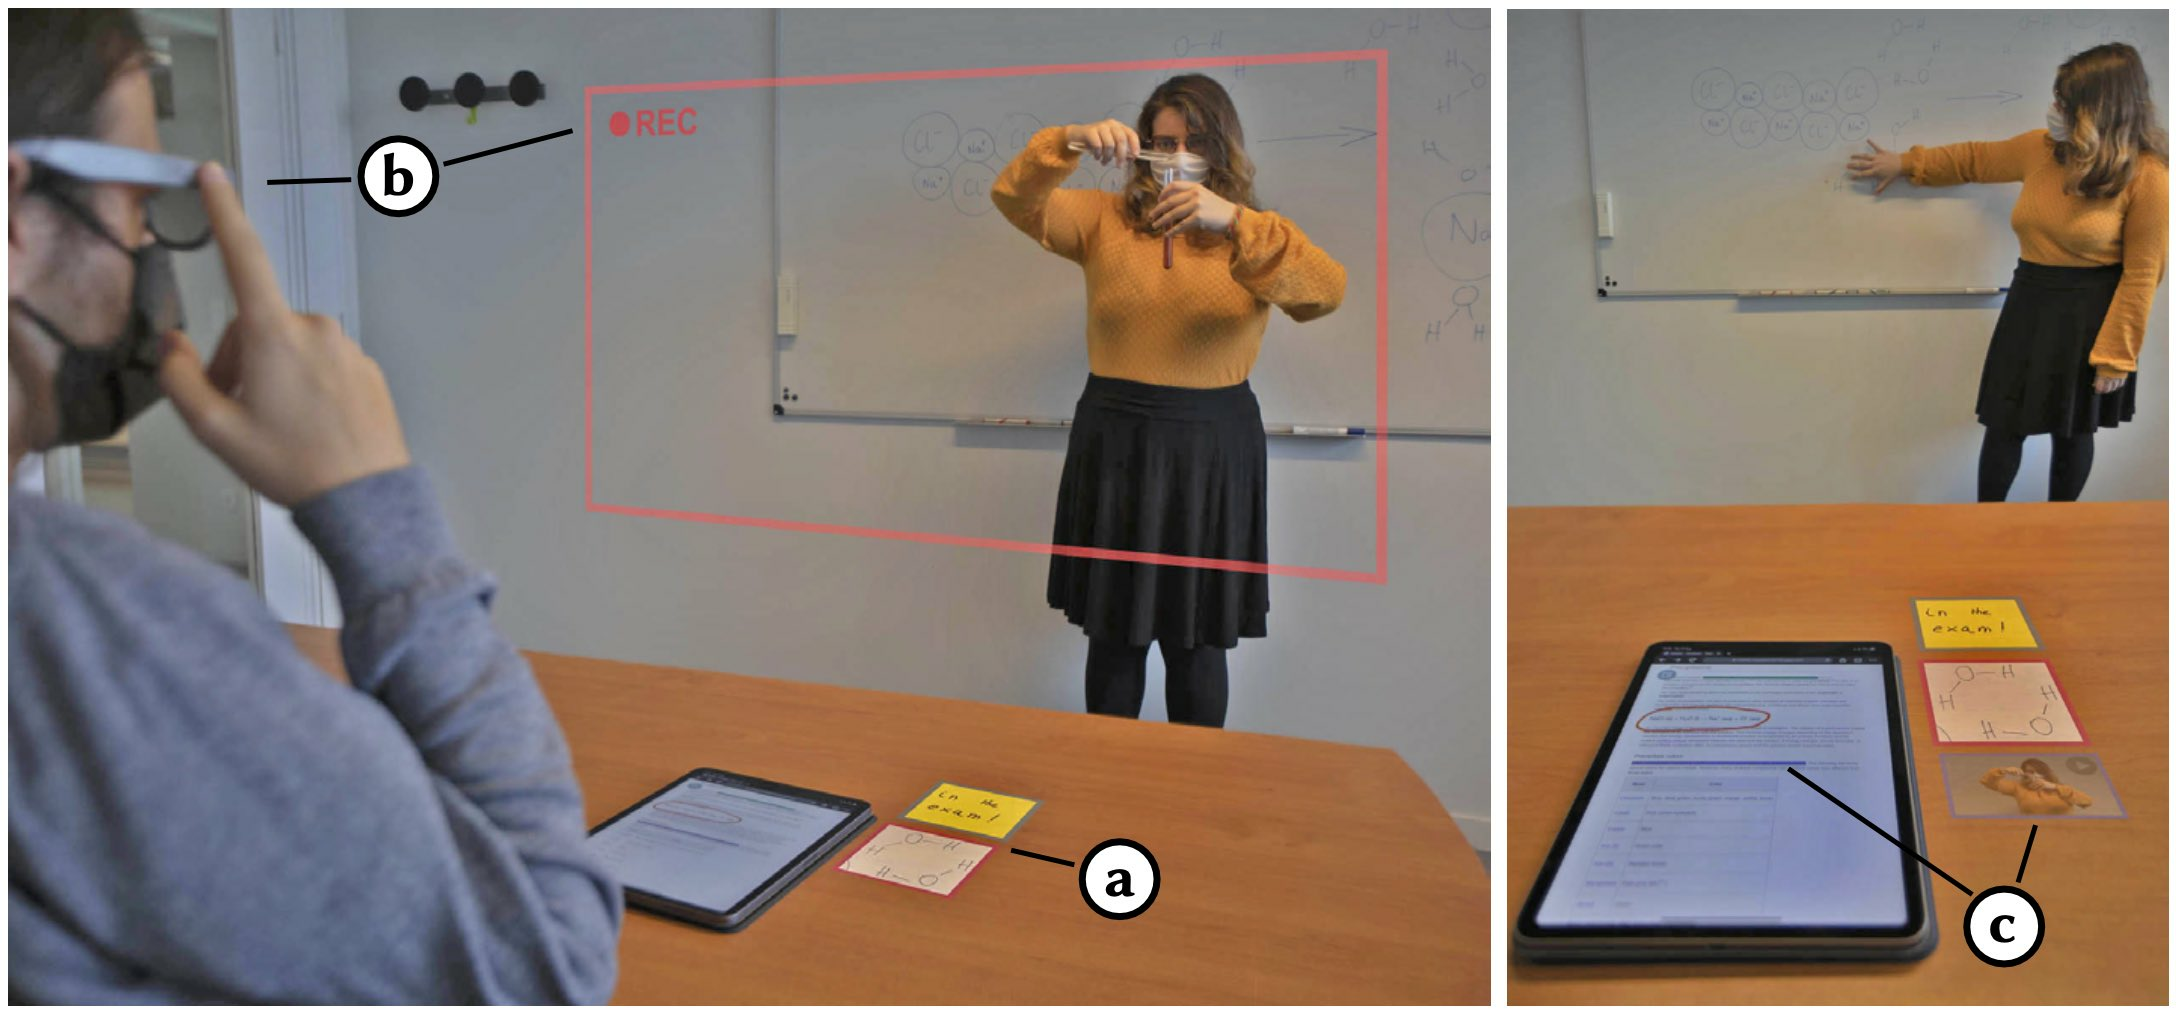 Two photos depicting a student seated at a desk, wearing smartglasses, and watching a Professor perform a chemistry experiment. A tablet lies on the desk in front of the student. Virtual content is displayed next to the tablet as well, thanks to the smartglasses' AR display capabilities.